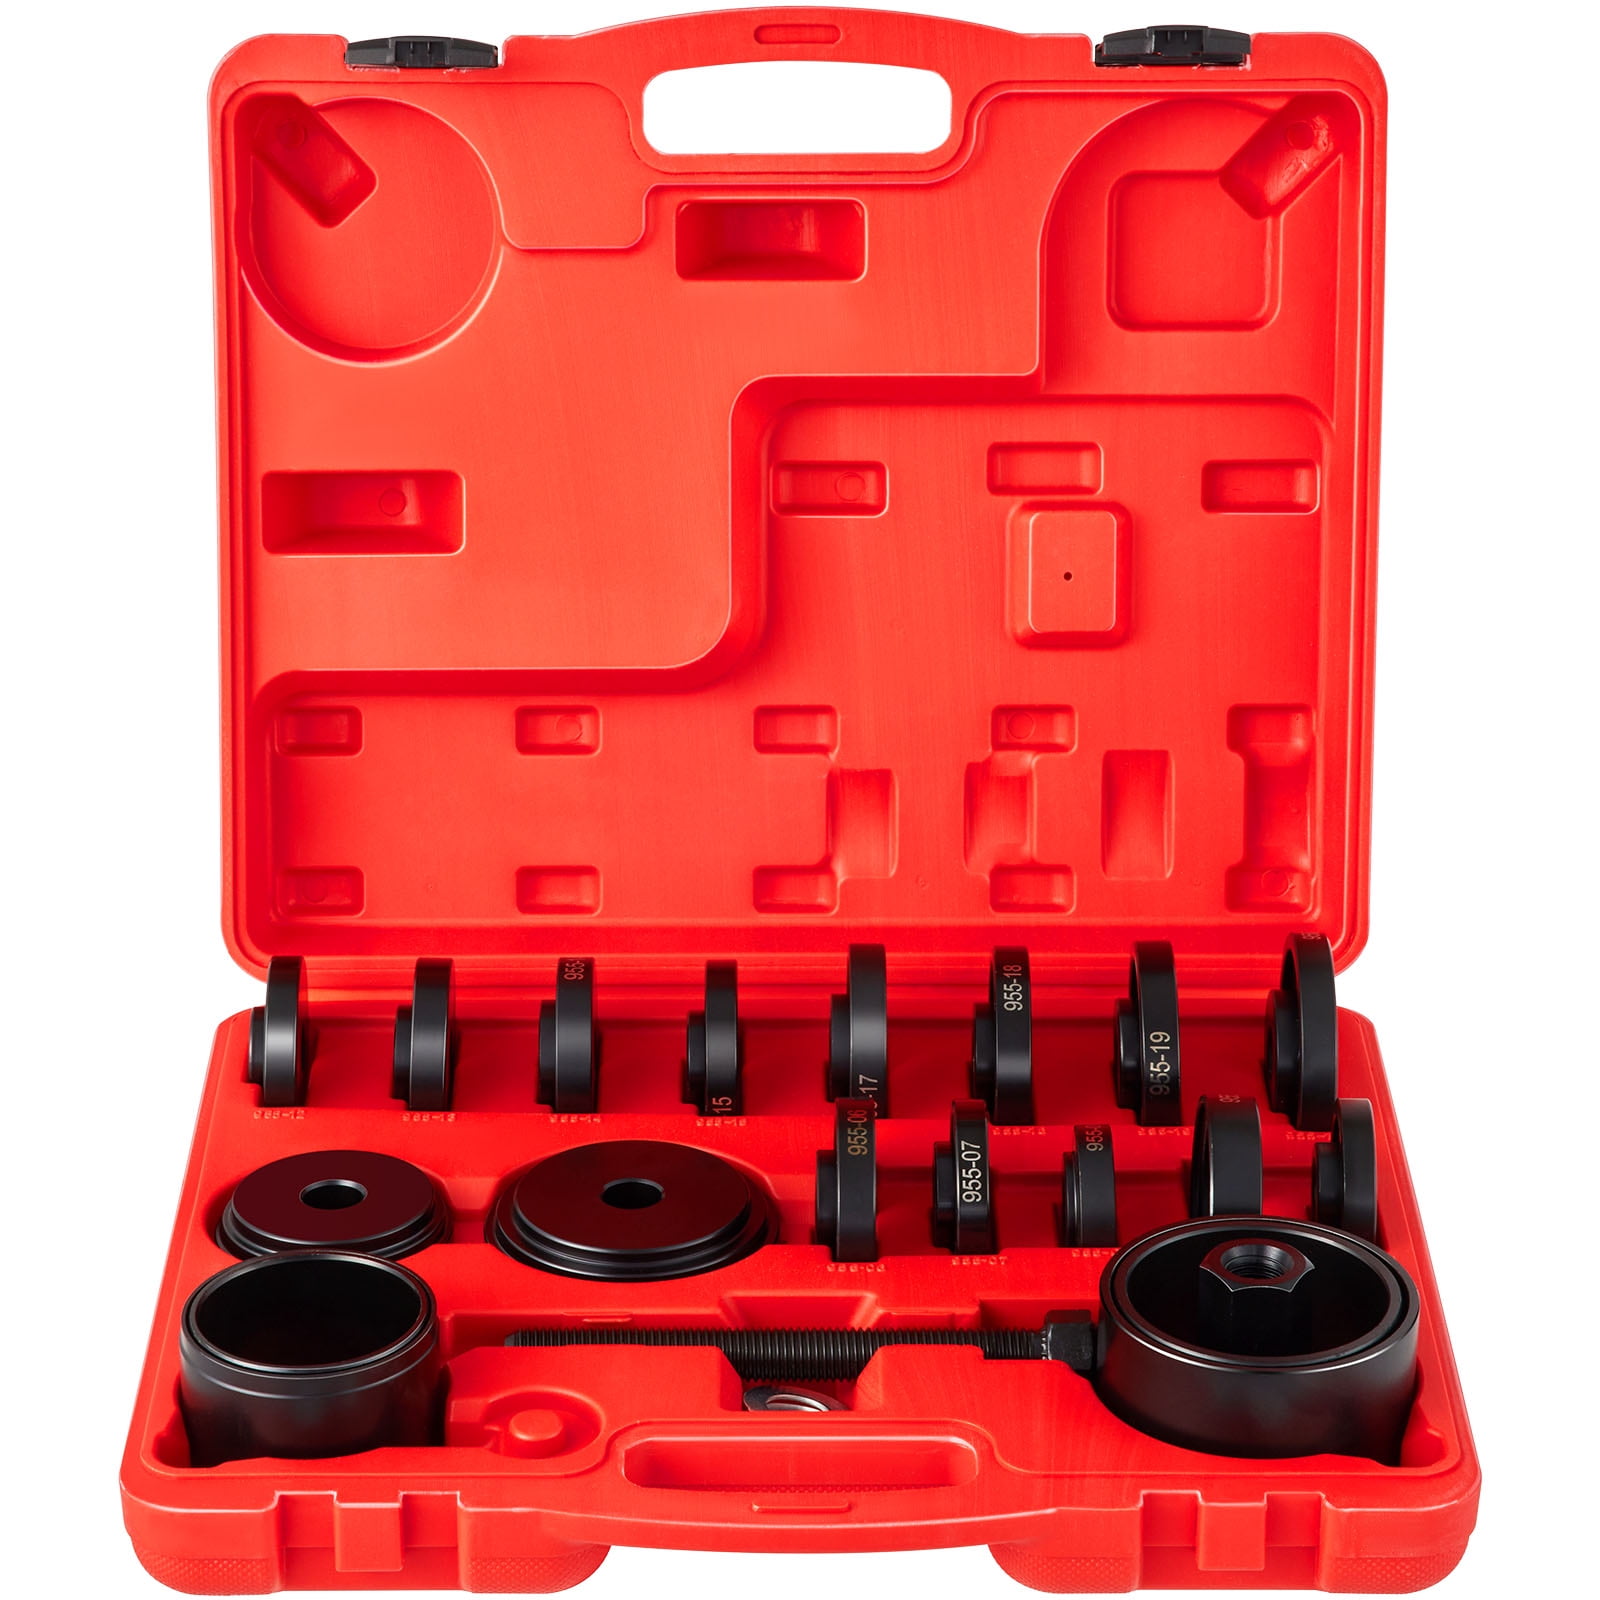 Pressure foot set (removal) for screwed wheel bearing units, Radlager  Werkzeug Kfz, Screwed wheel bearing tool sets, Motor/commercial vehicle  specialty tools, product worlds